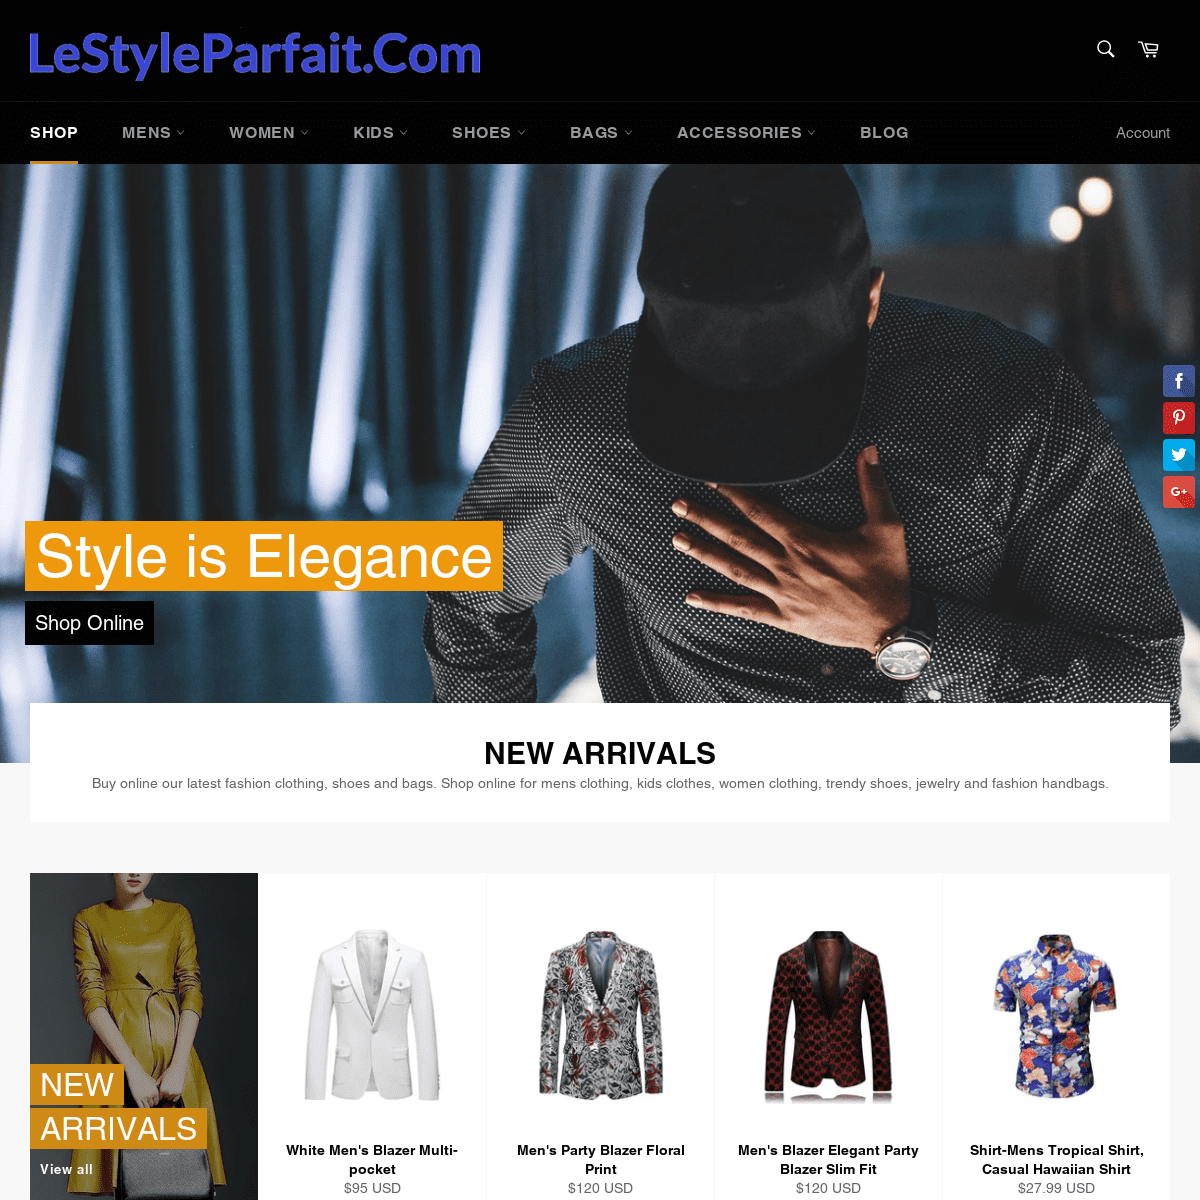 Shopping Online For Clothing, Shoes, Bags | LeStyleParfait.Com